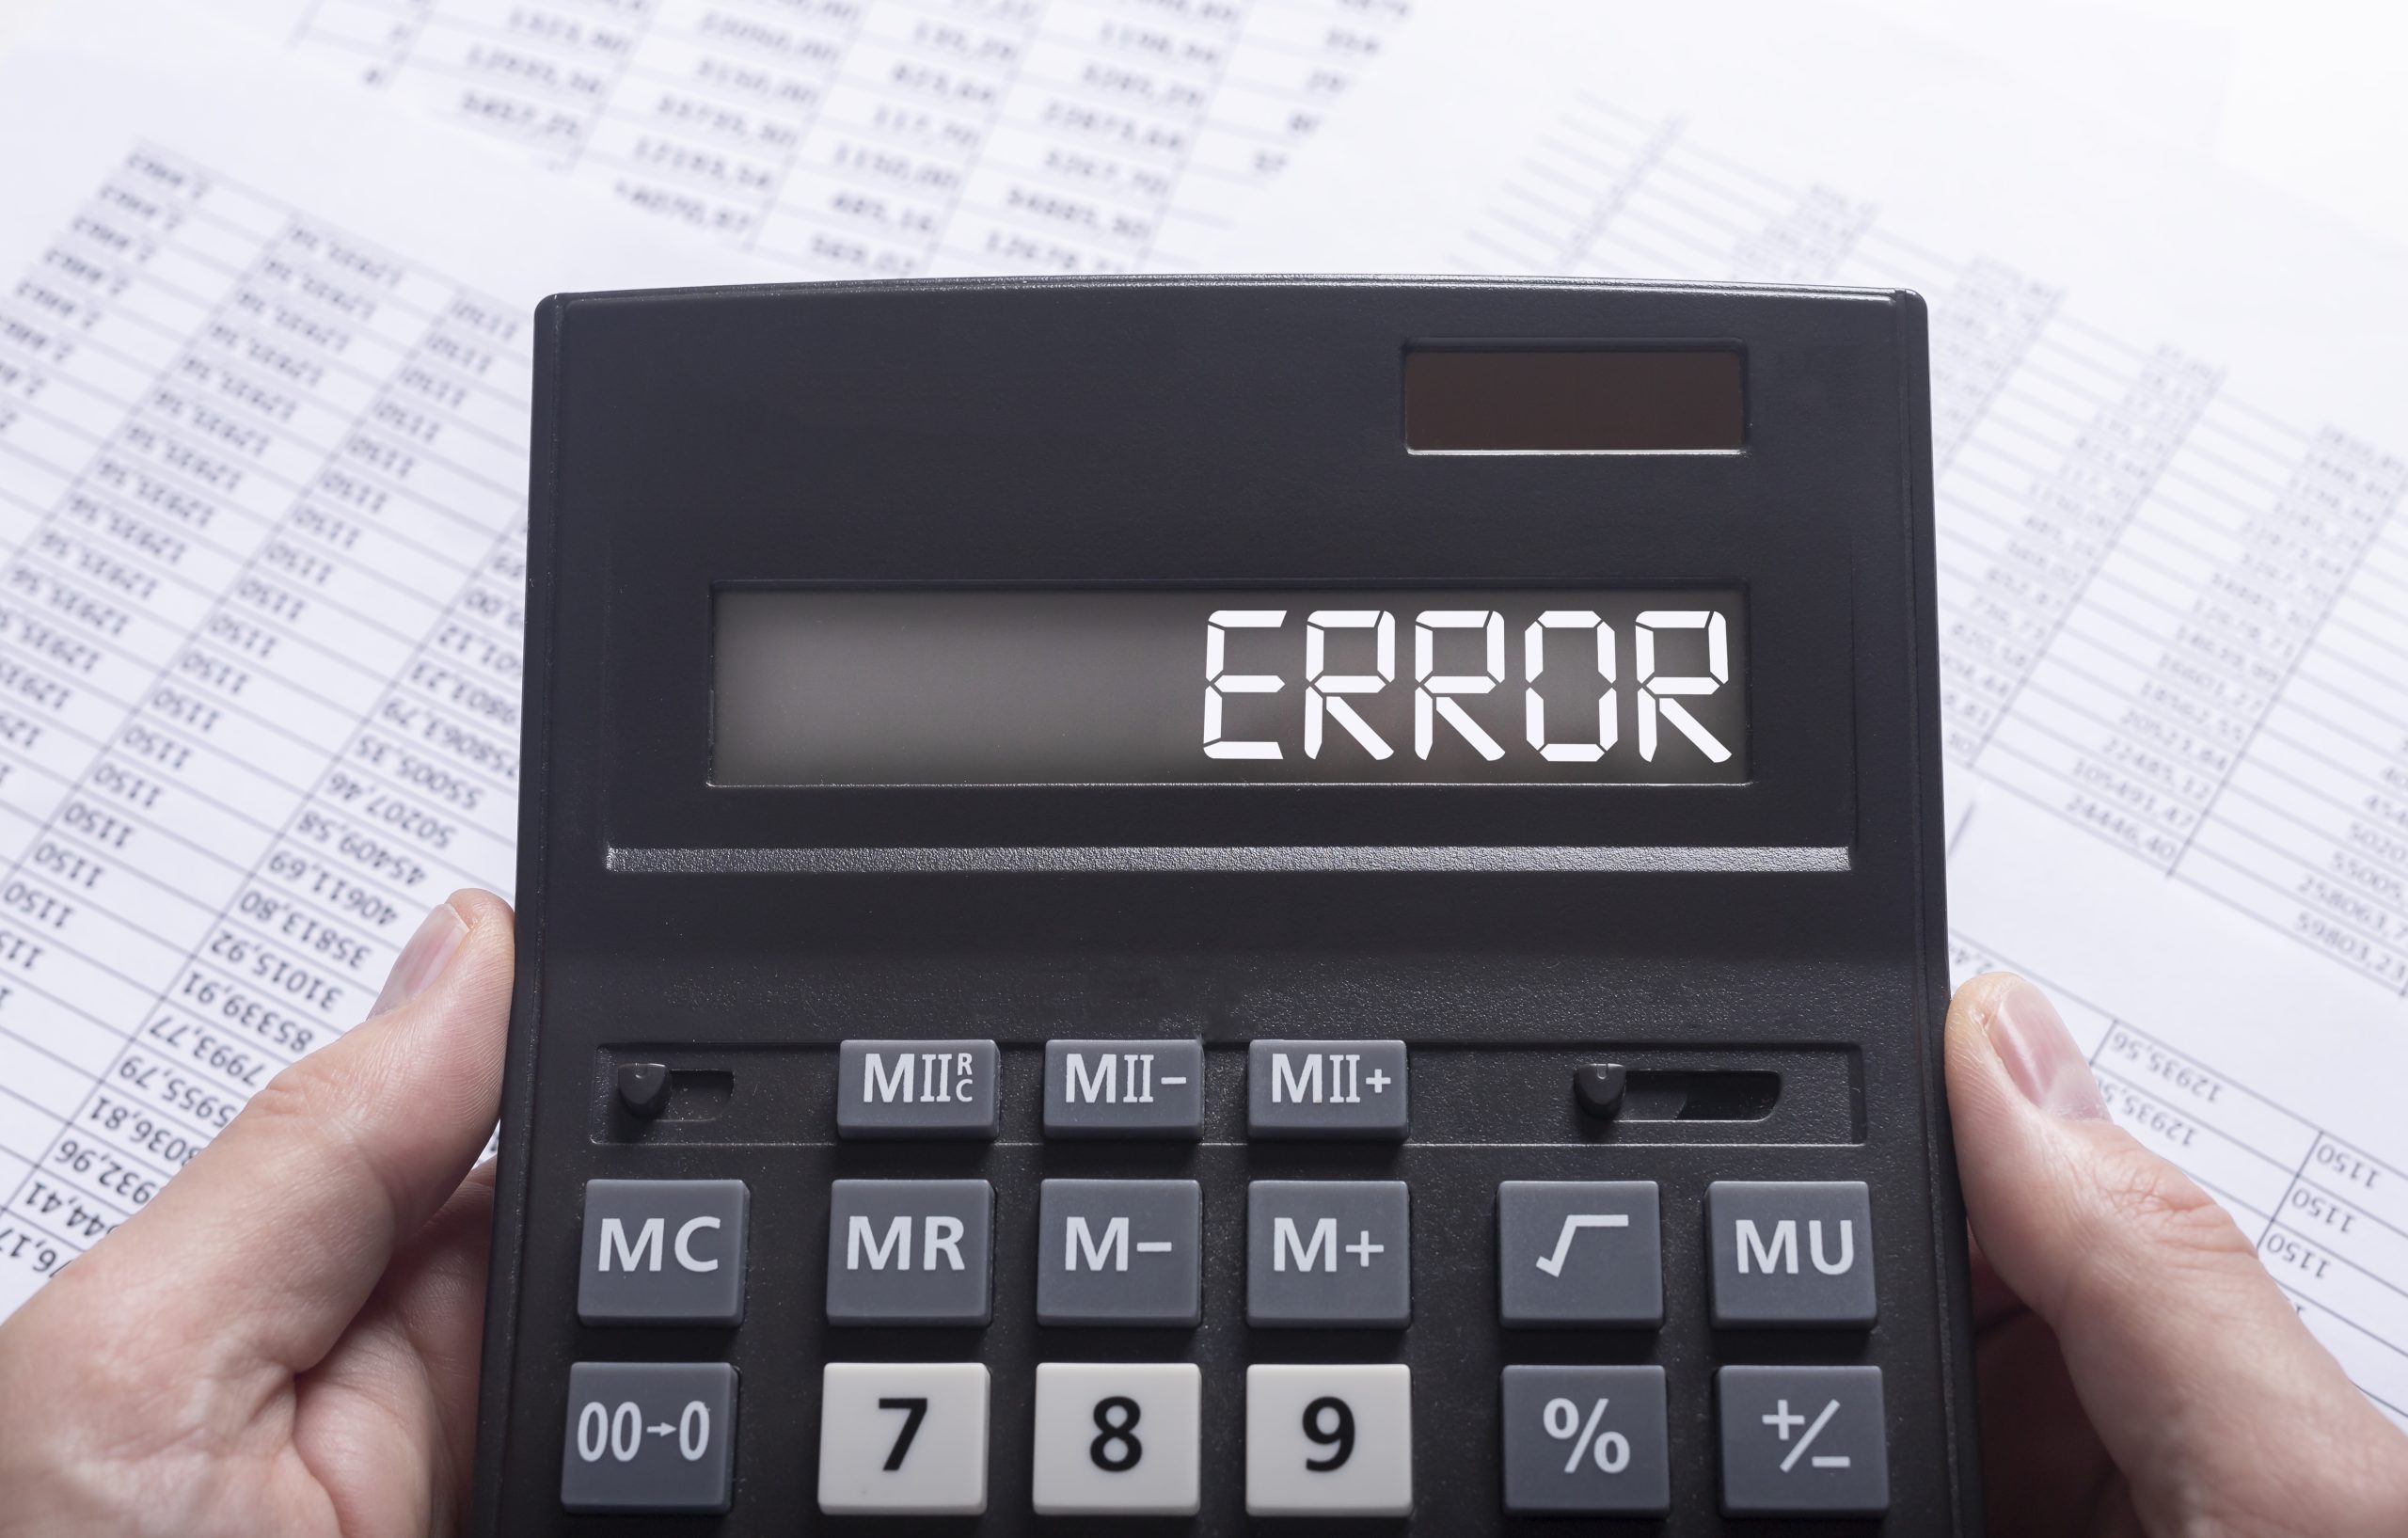 Save Time and Reduce Errors